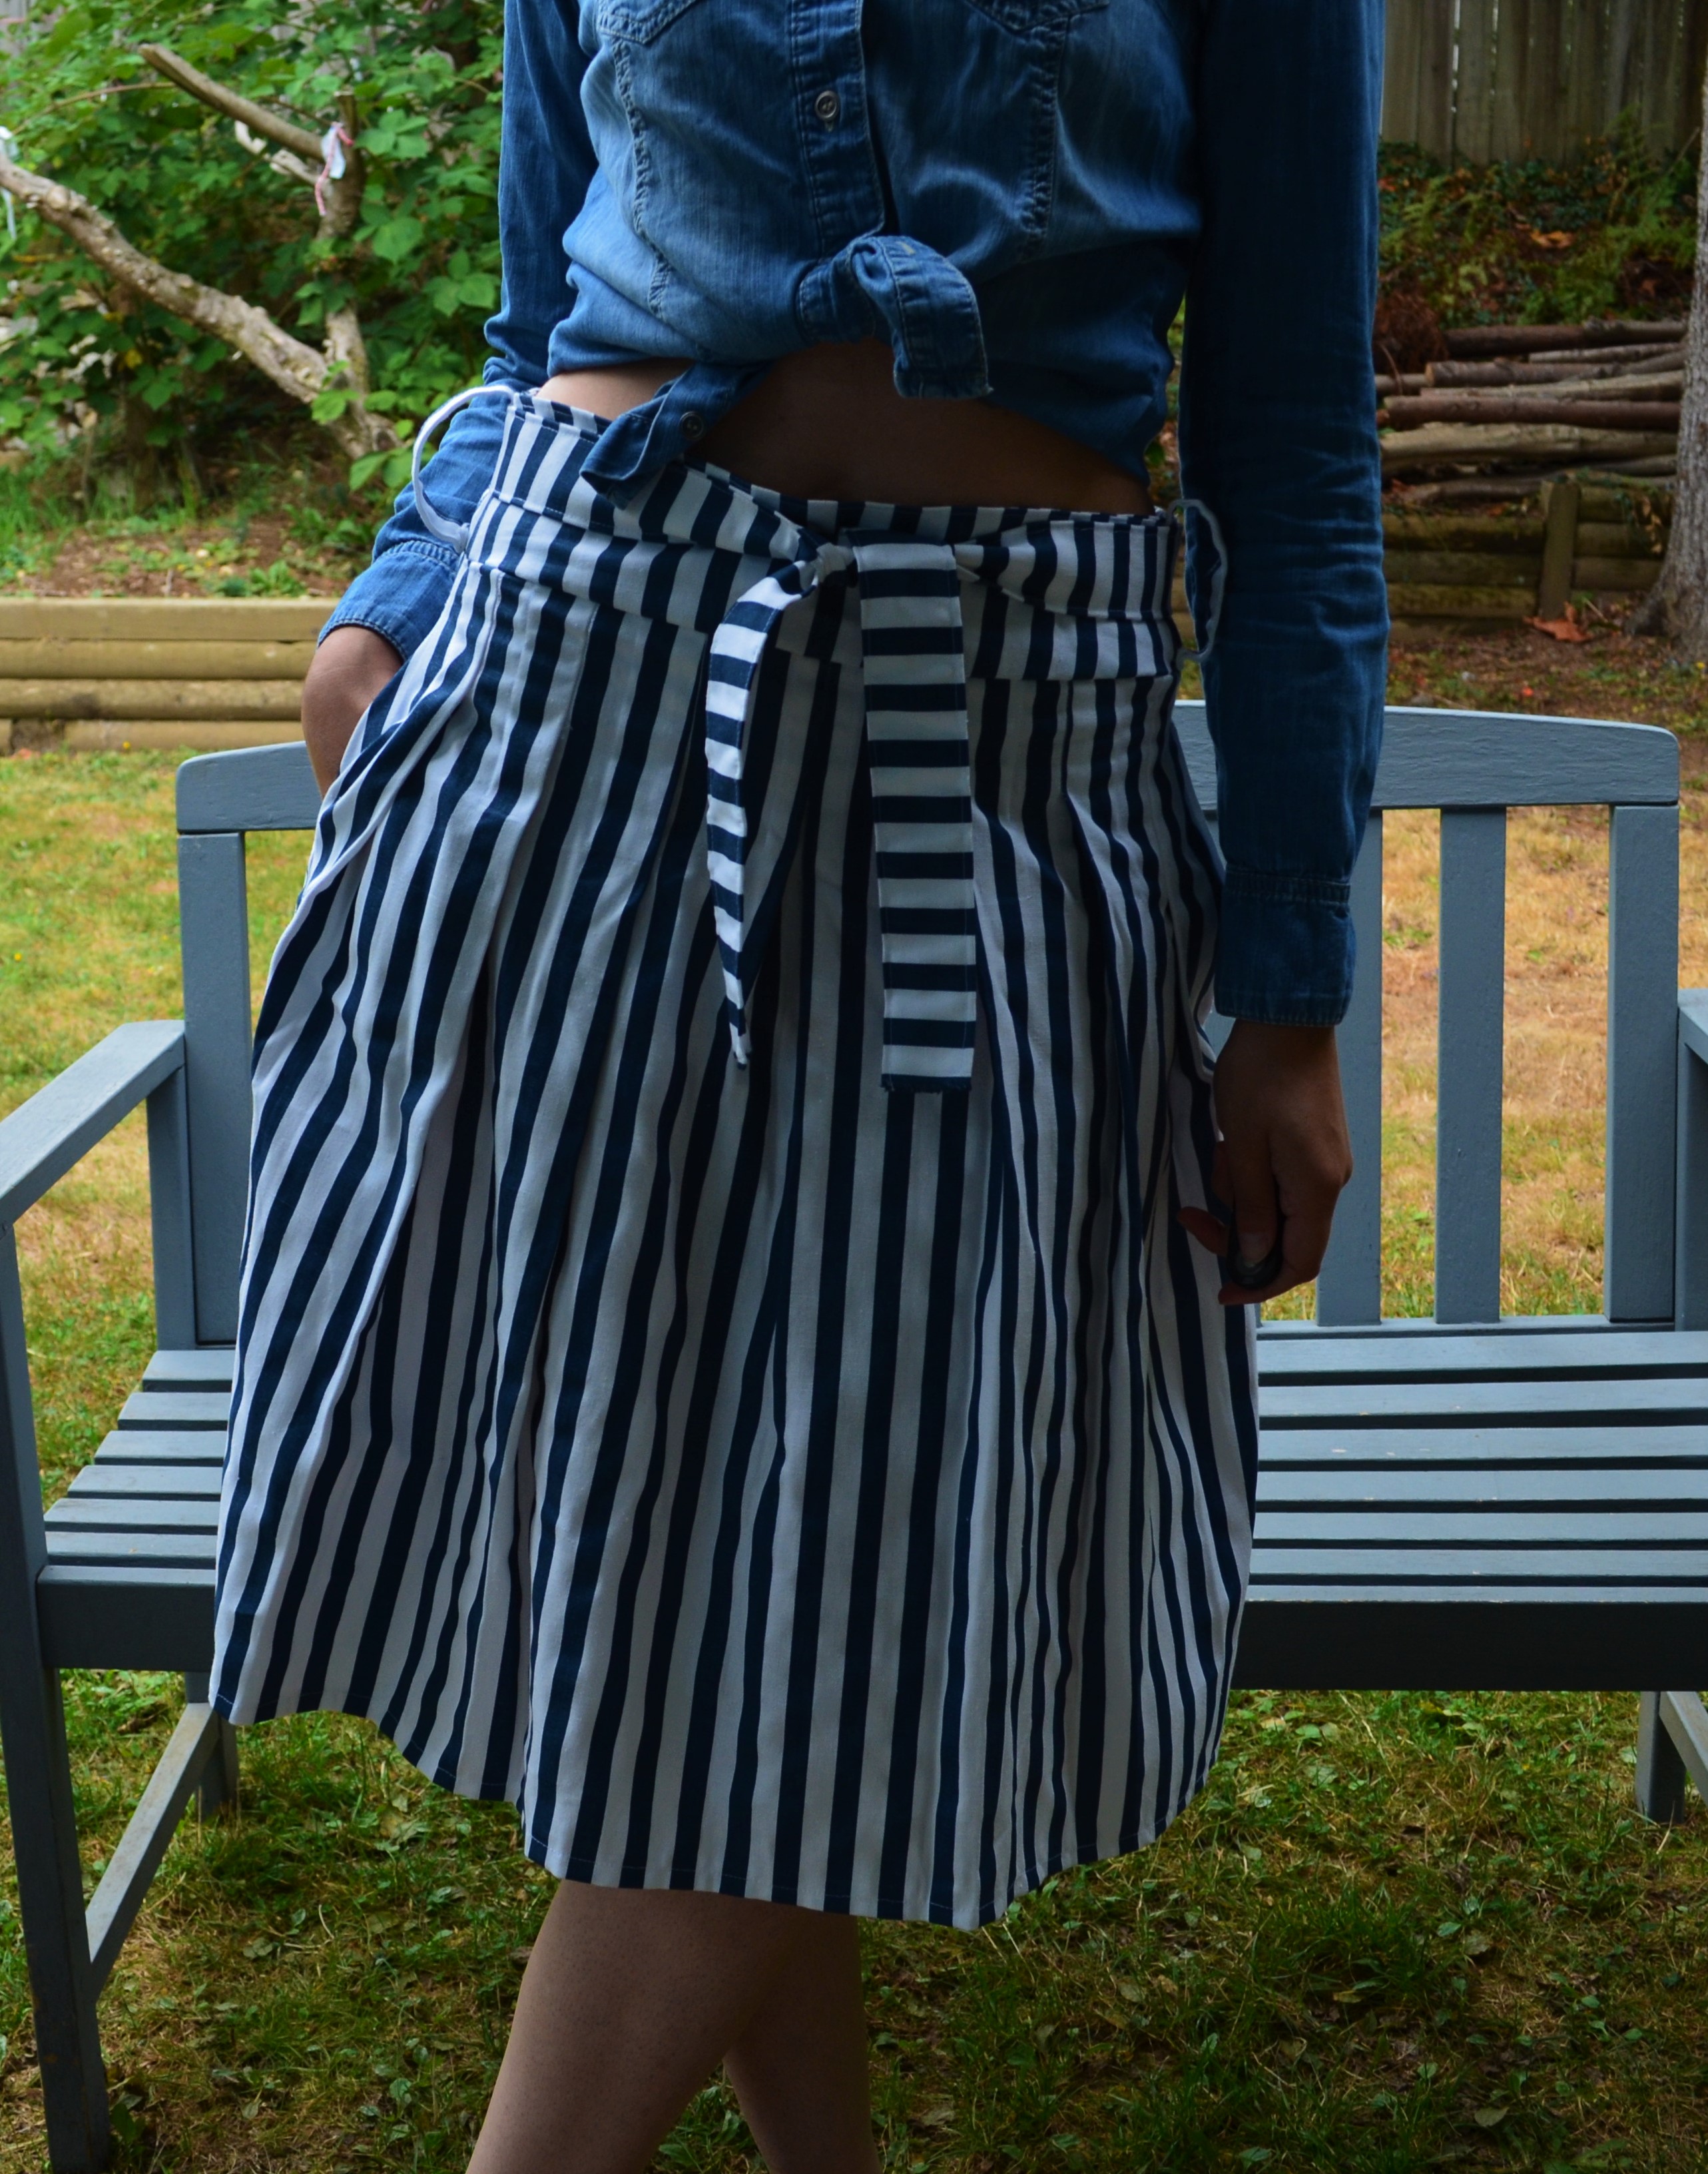 FREE SEWING PATTERN: The Pleated skirt pattern